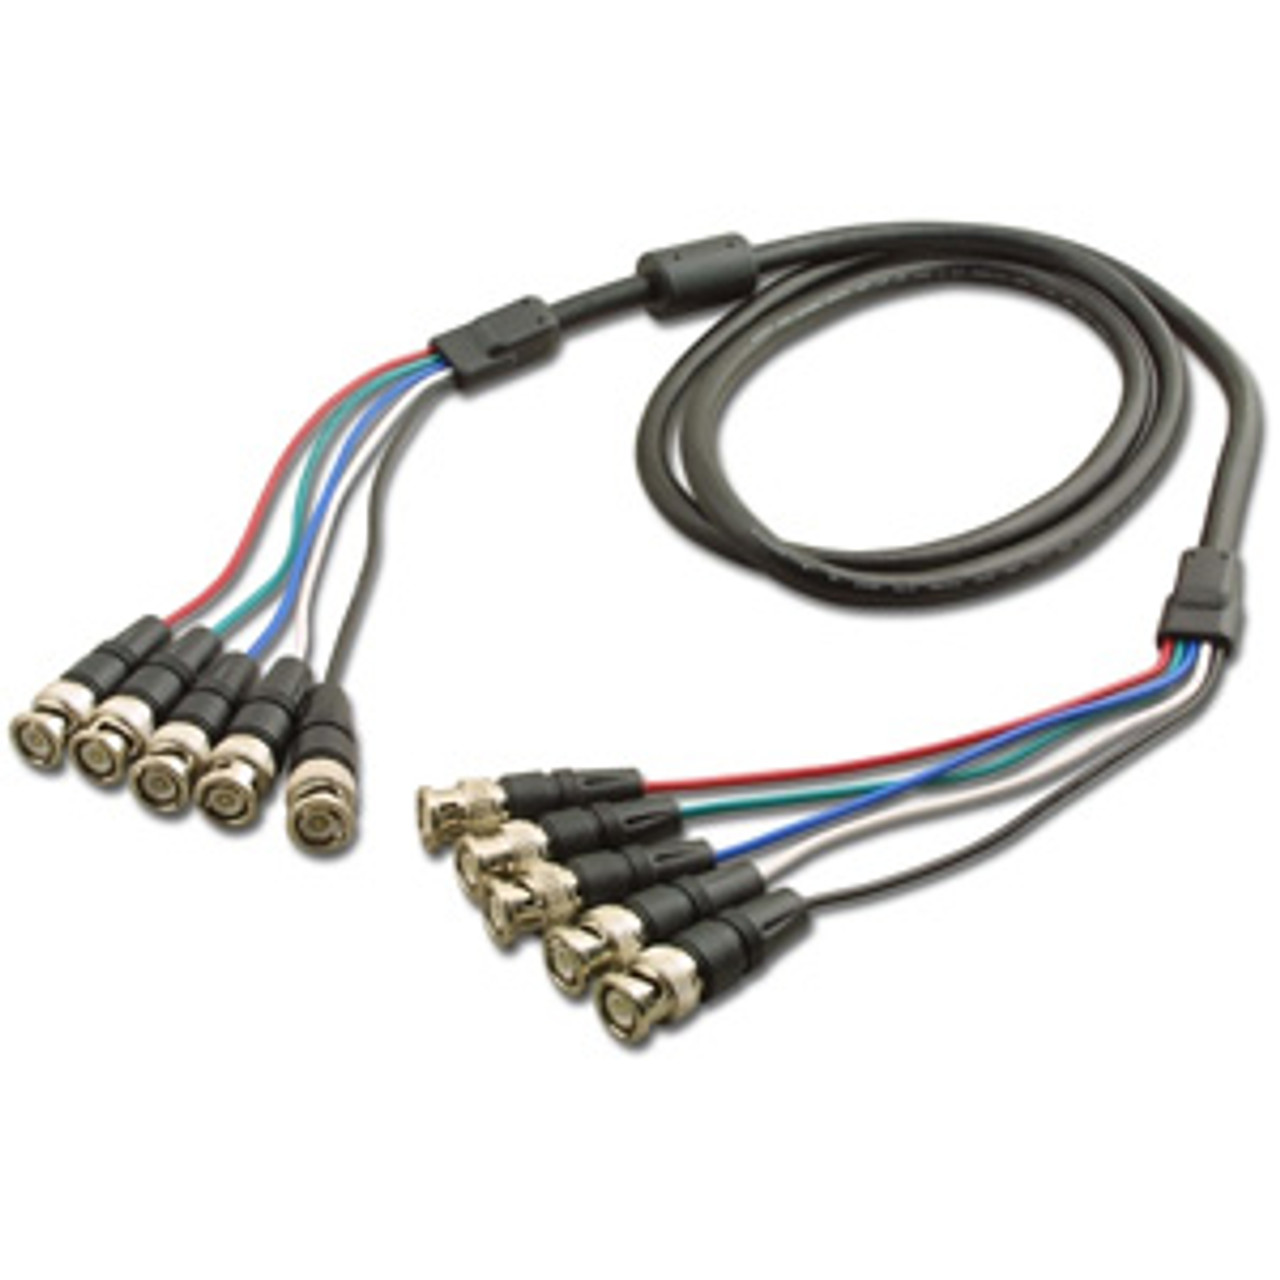 6' 5 BNC/M to 5 BNC/M Cable